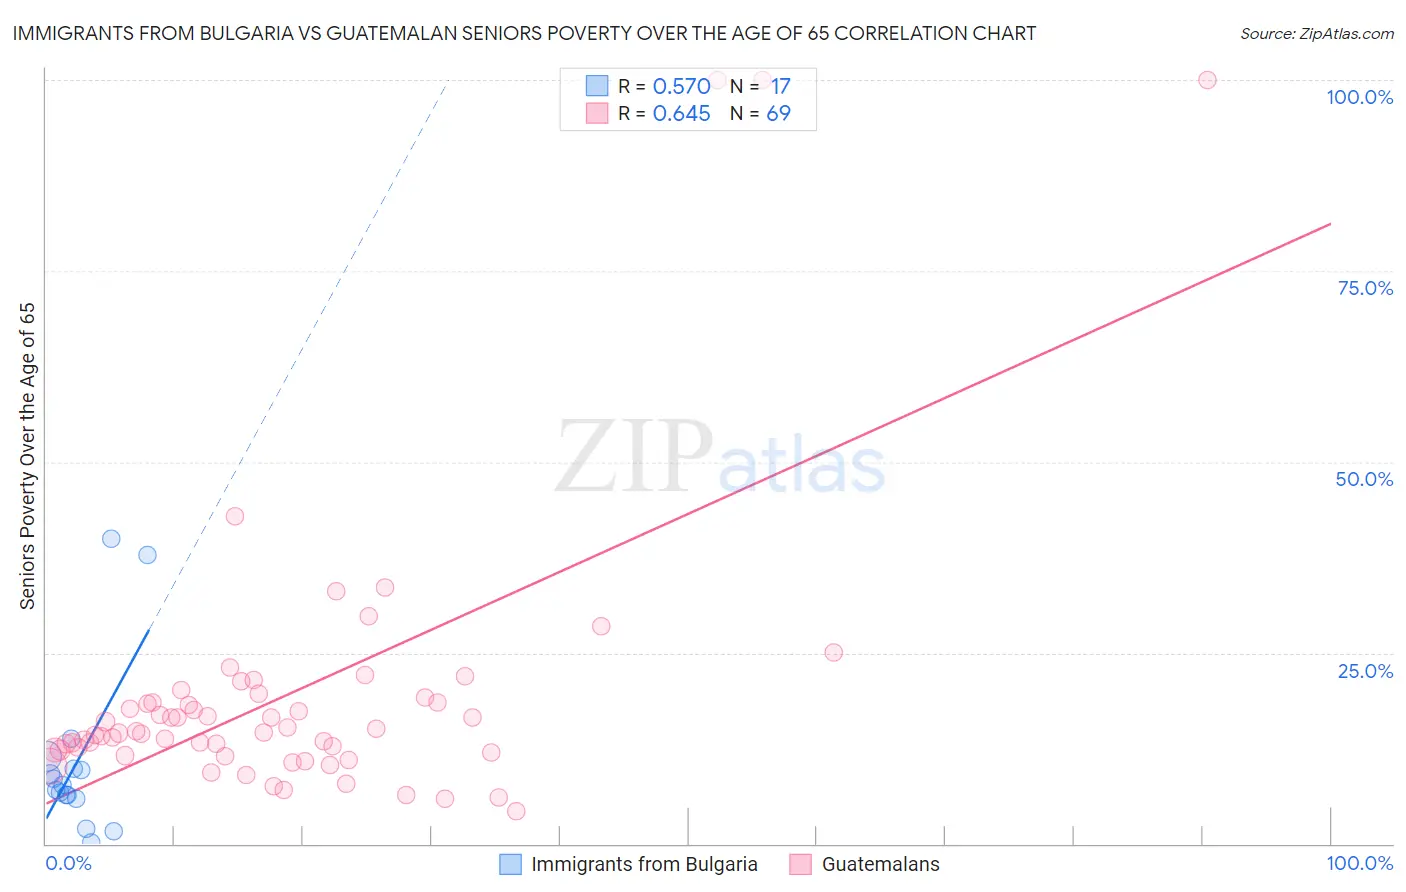 Immigrants from Bulgaria vs Guatemalan Seniors Poverty Over the Age of 65